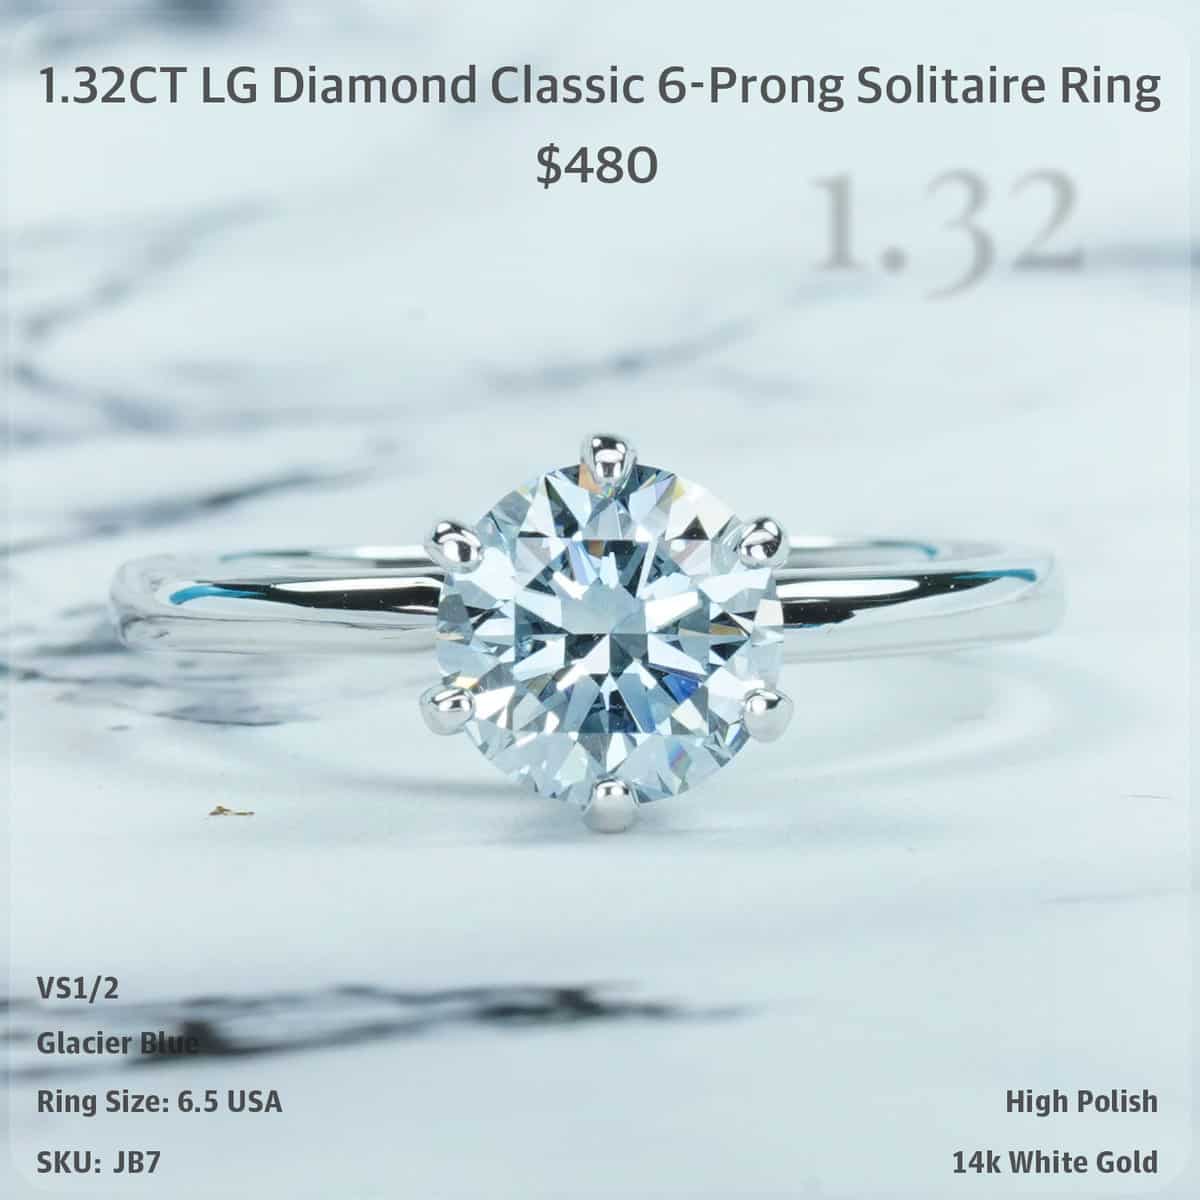 1.32CT LG Diamond Classic 6-Prong Solitaire Ring